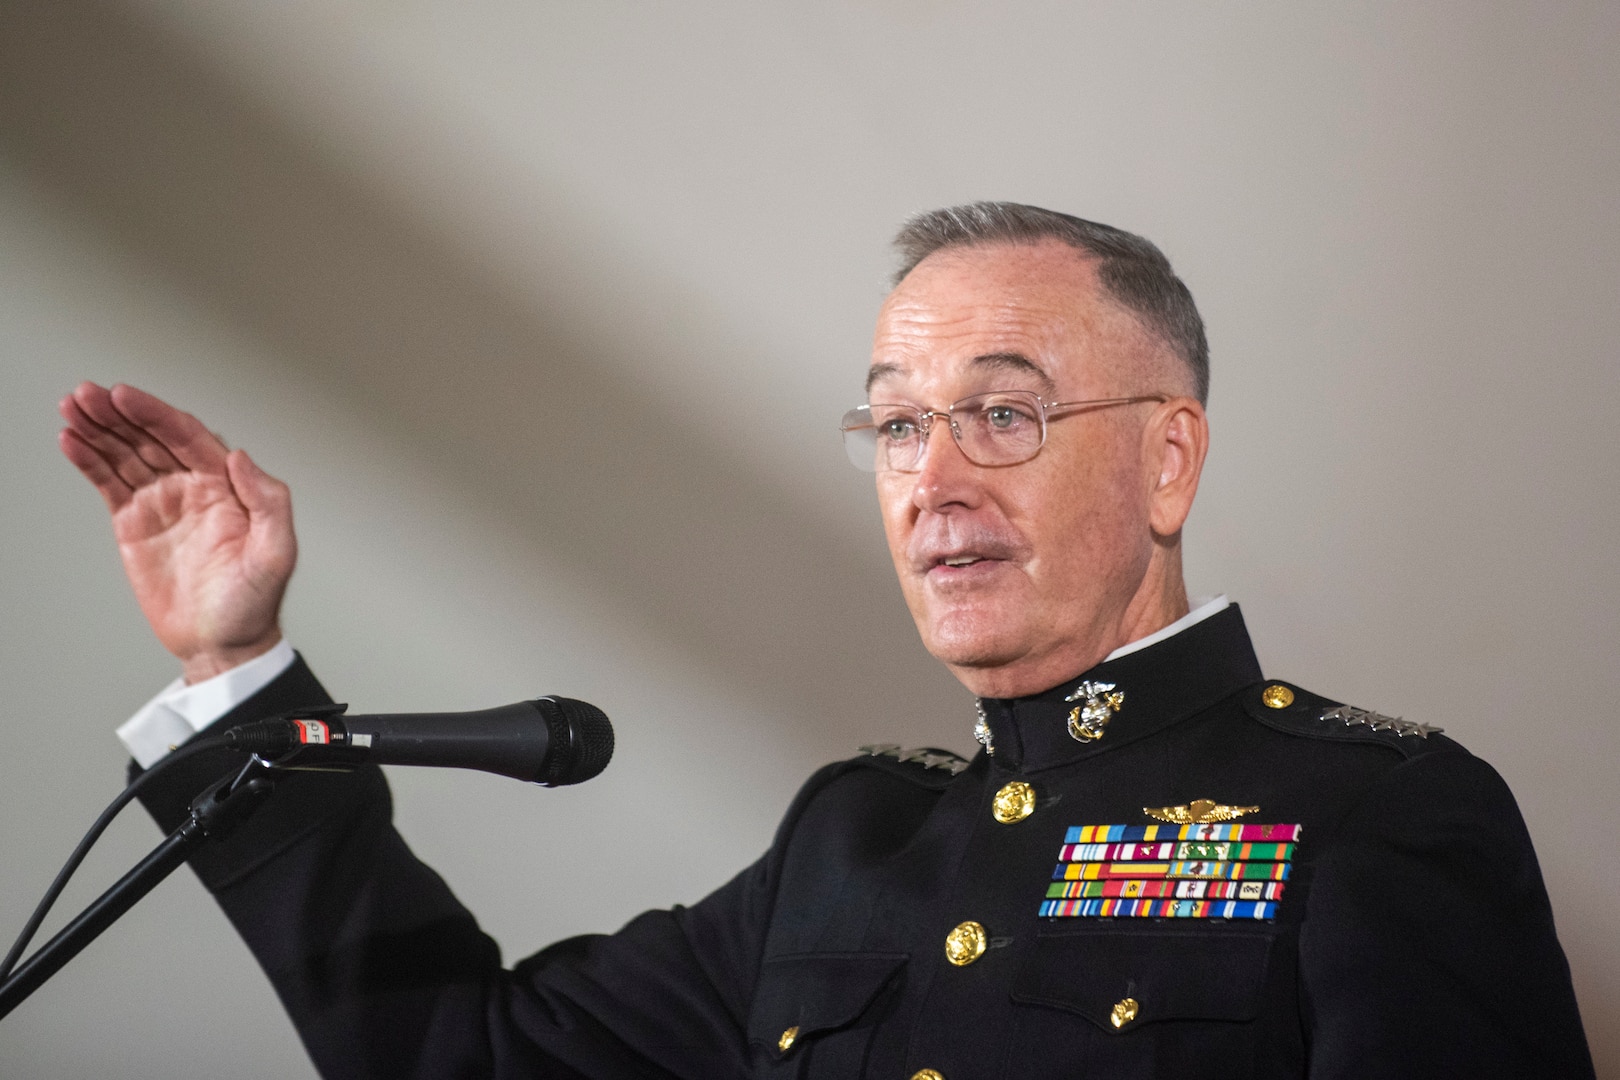 U.S. Marine Corps Gen. Joe Dunford, chairman of the Joint Chiefs of Staff, speaks at the National Defense University (NDU) Graduation at Fort Lesley J. McNair, Washington D.C., June 13, 2019. The NDU Class of 2019 consists of leaders from the U.S. military services, the Department of Defense, other federal government agencies, as well as from the foreign militaries, allied and partner nations.